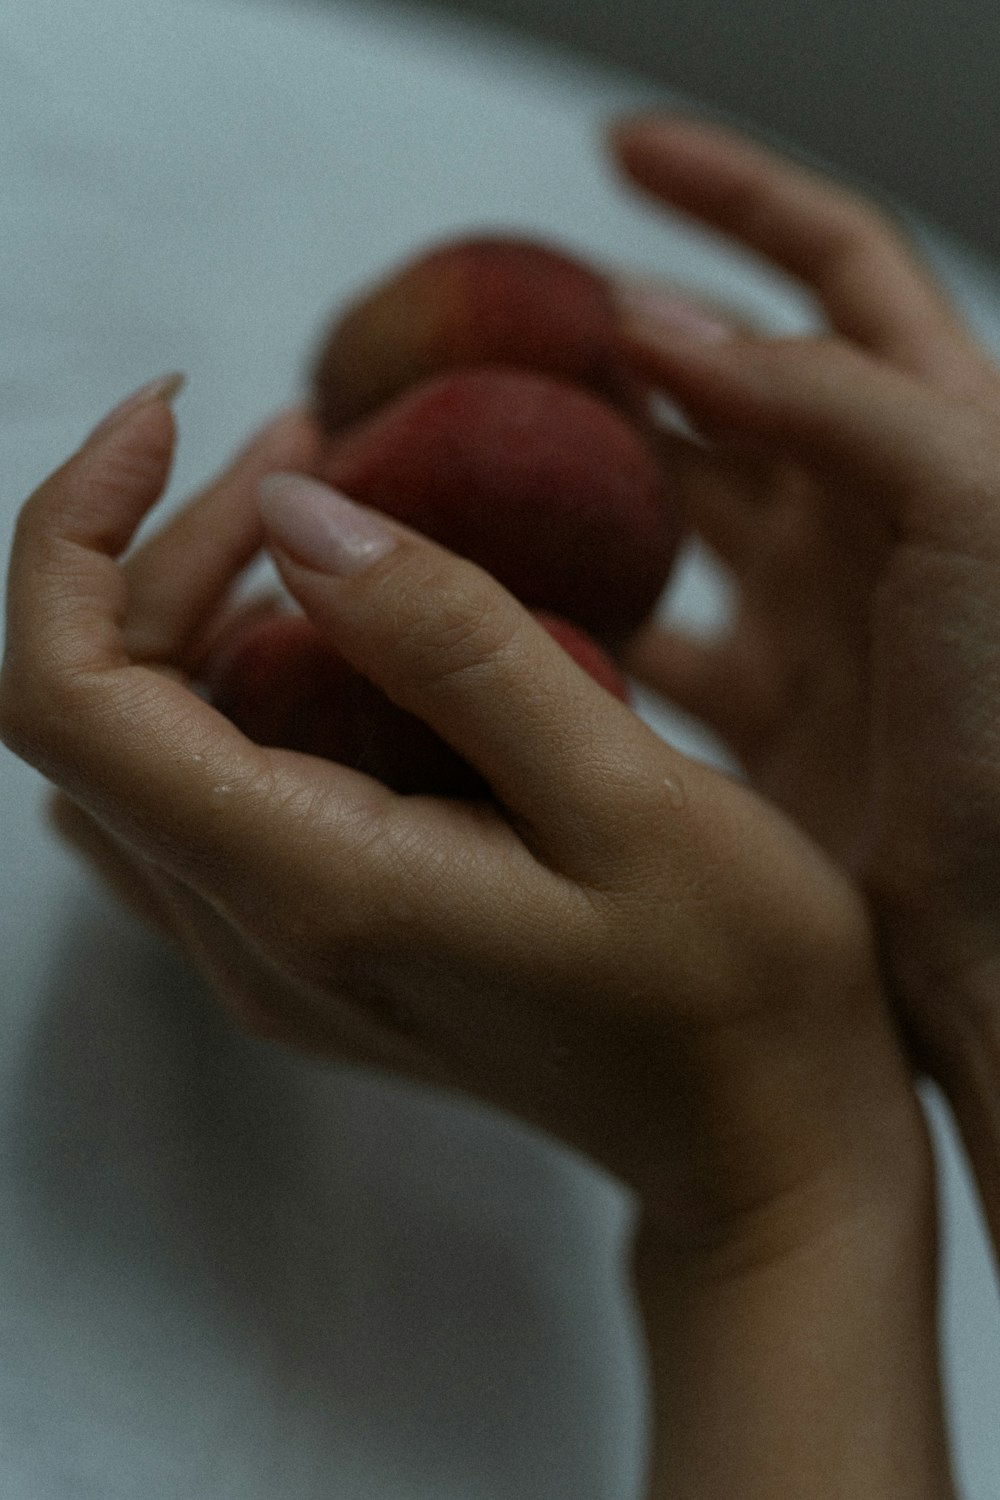 a person holding a piece of fruit in their hands